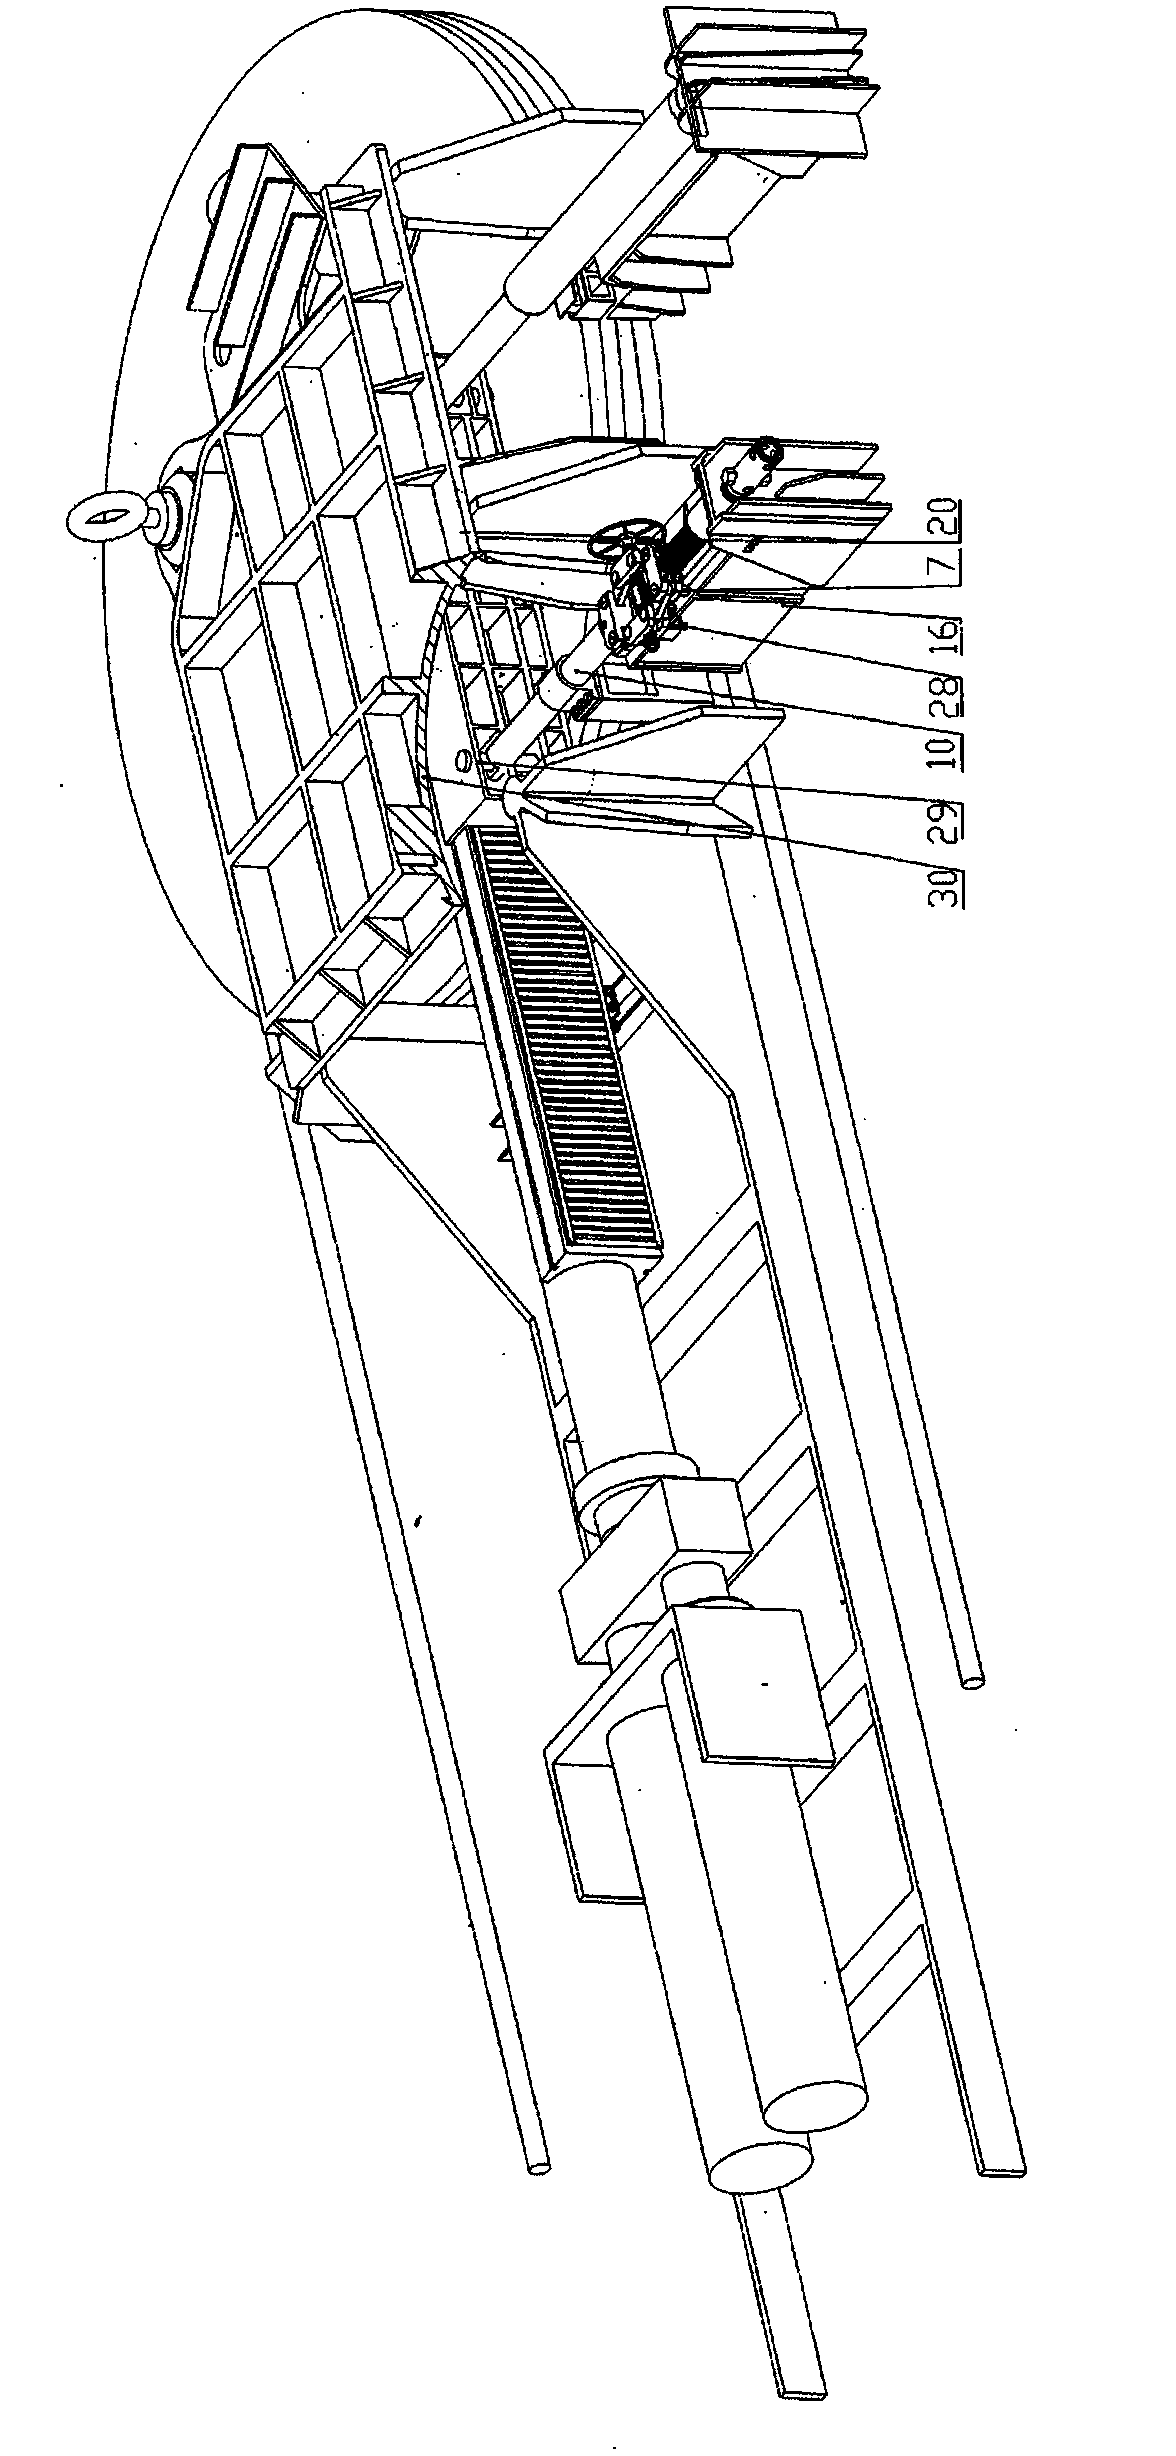 Adjustable tight pressing device for forming mill